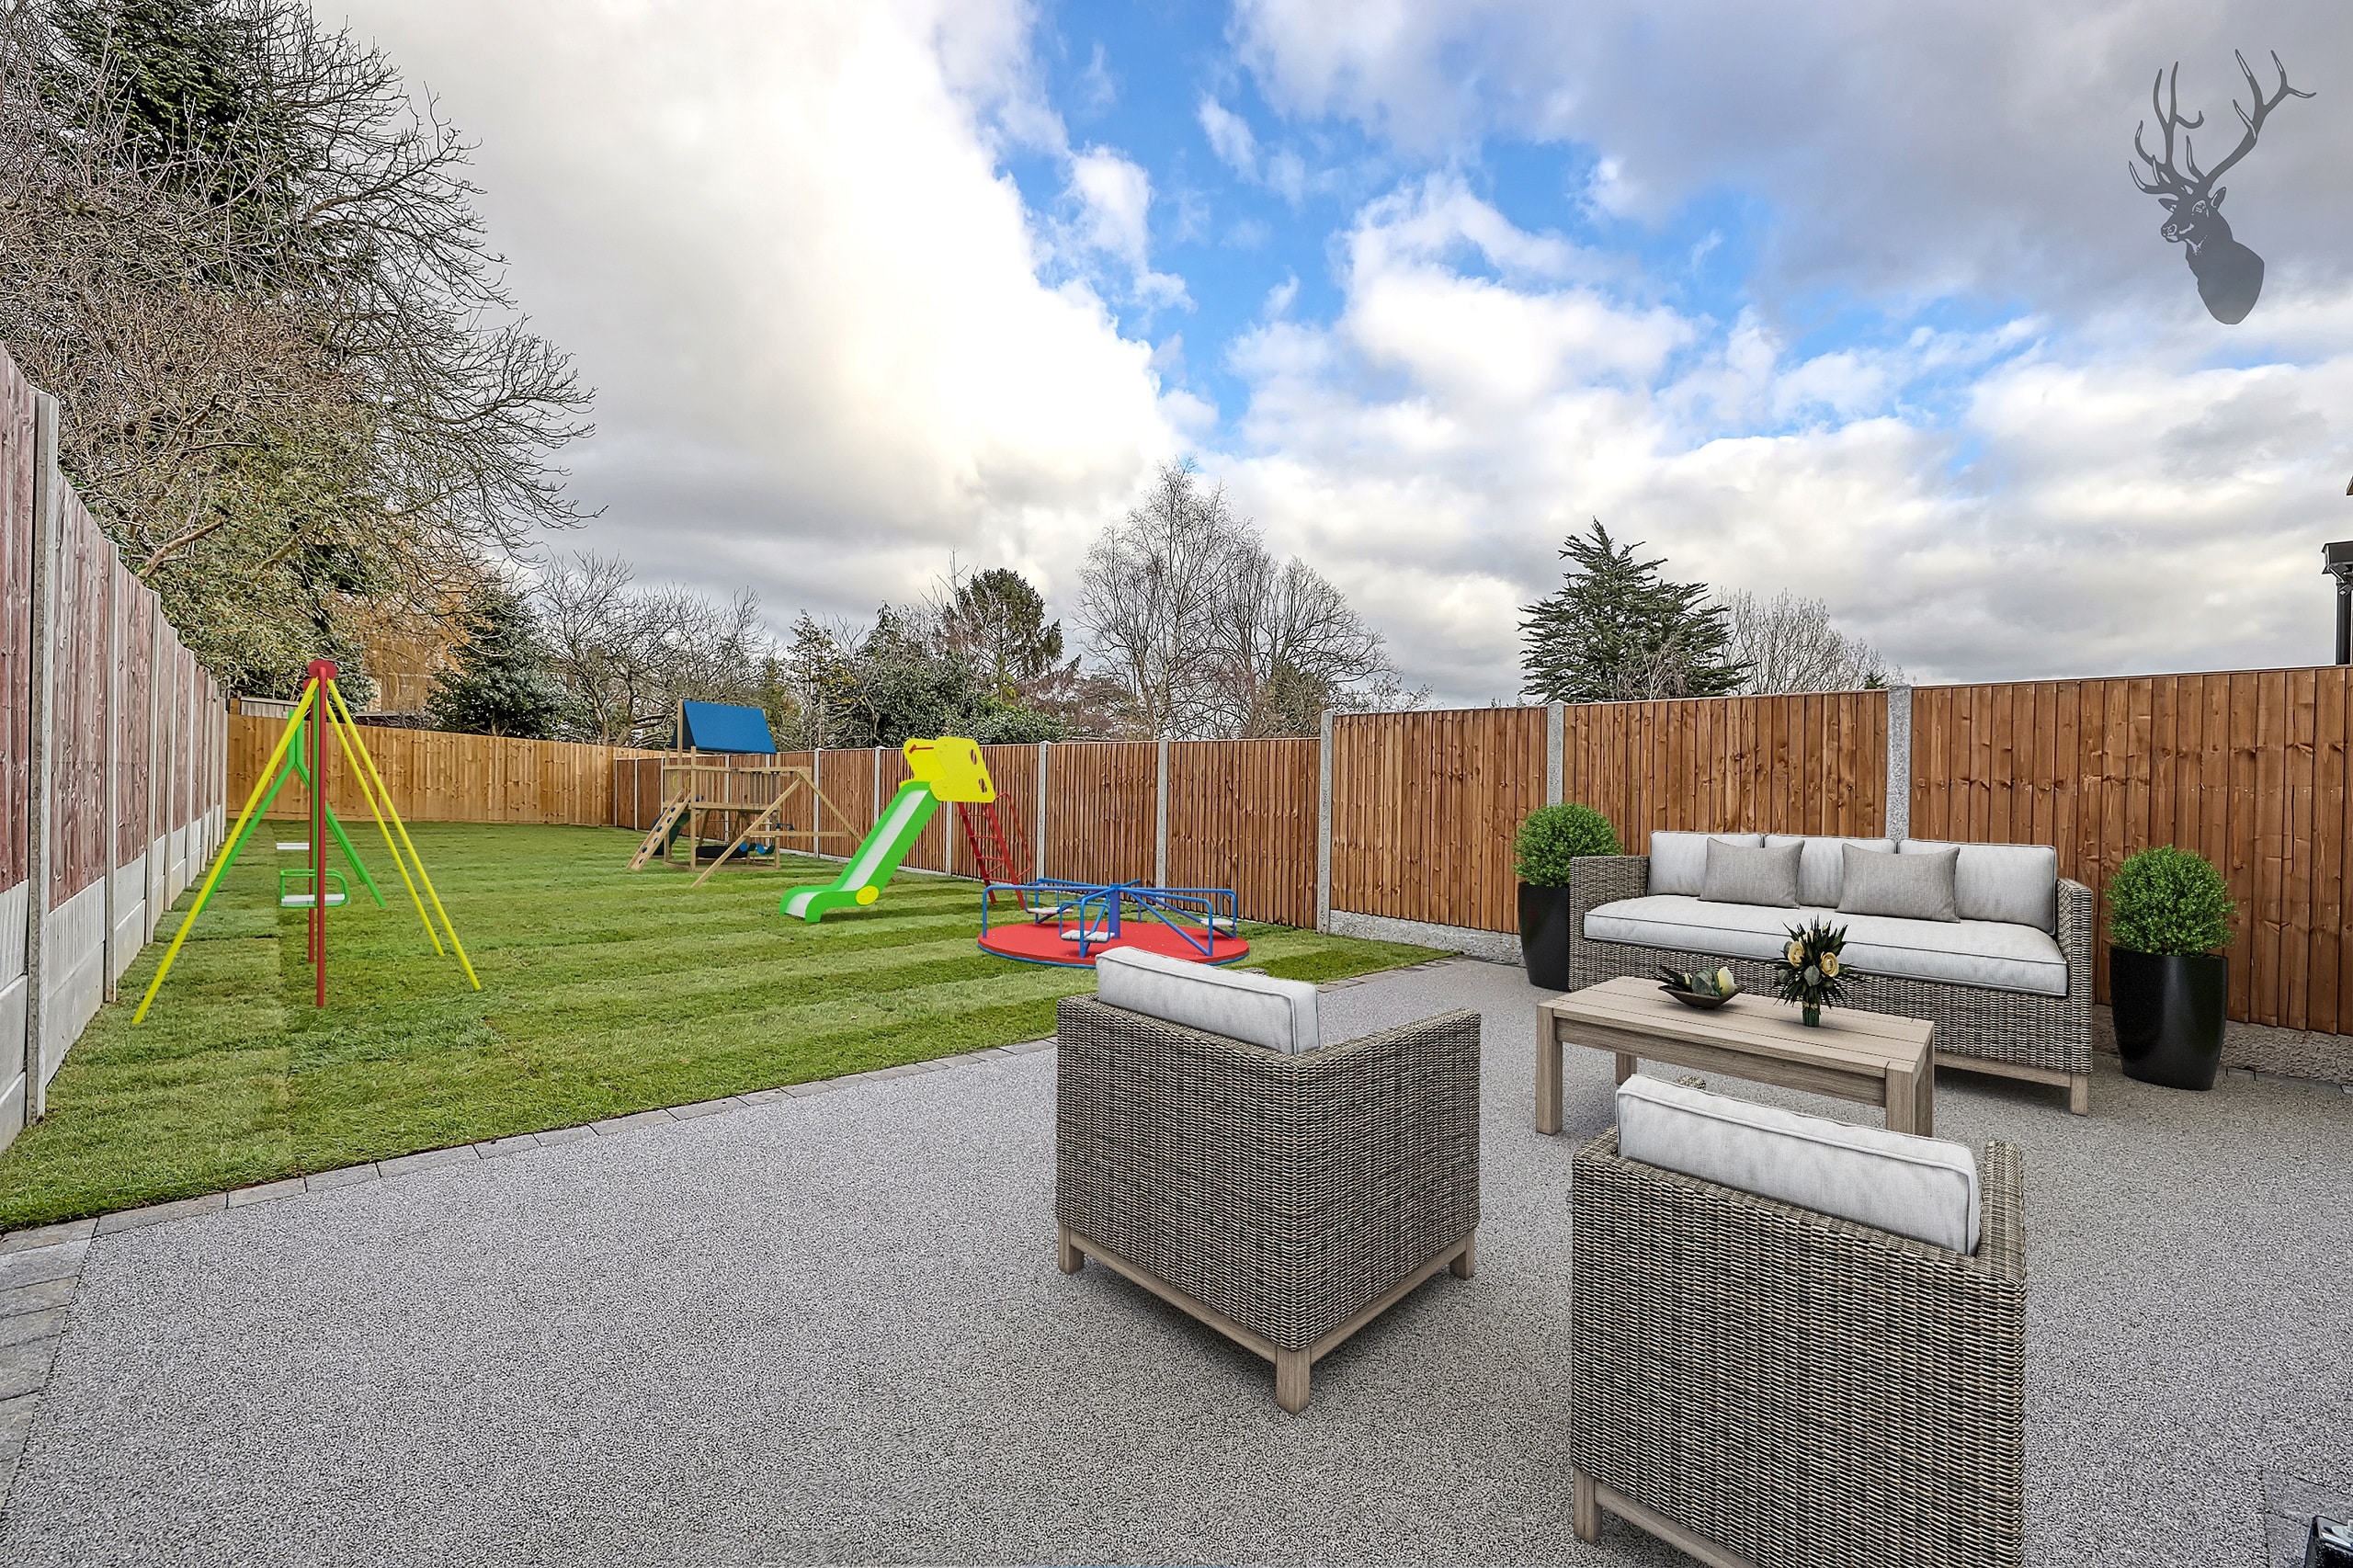 patio, lawn and garden at Chingford semi-detached property development project